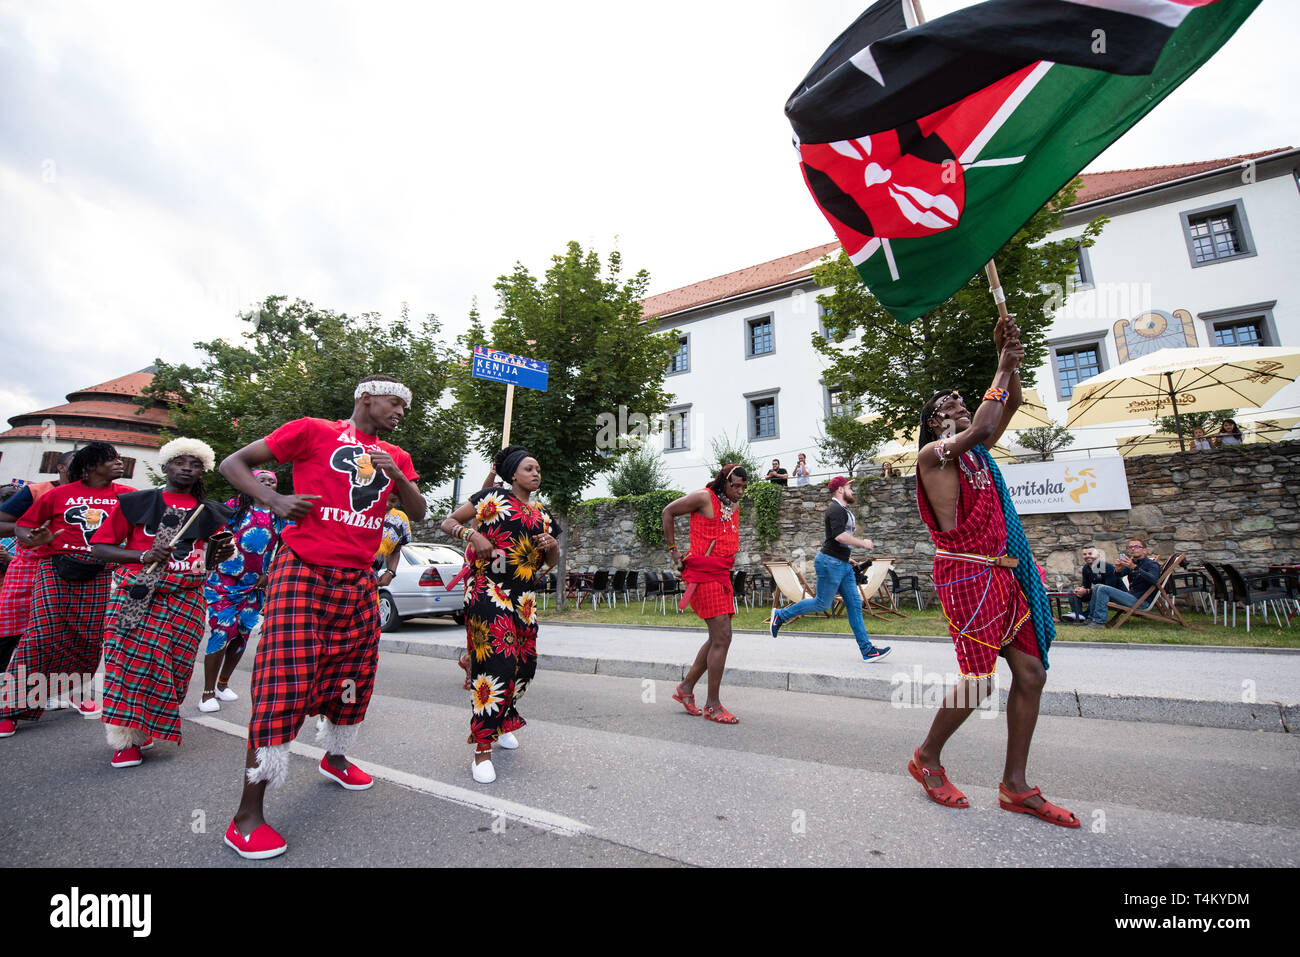 Members of African Tumbas from Nairobi, Kenya during the procession at 30th Folkart International CIOFF Folklore Festival, folklore sub-festival of Festival Lent, one of the largest outdoor festivals in Europe. Folkart, Festival Lent, Maribor, Slovenia, 2018. Stock Photo